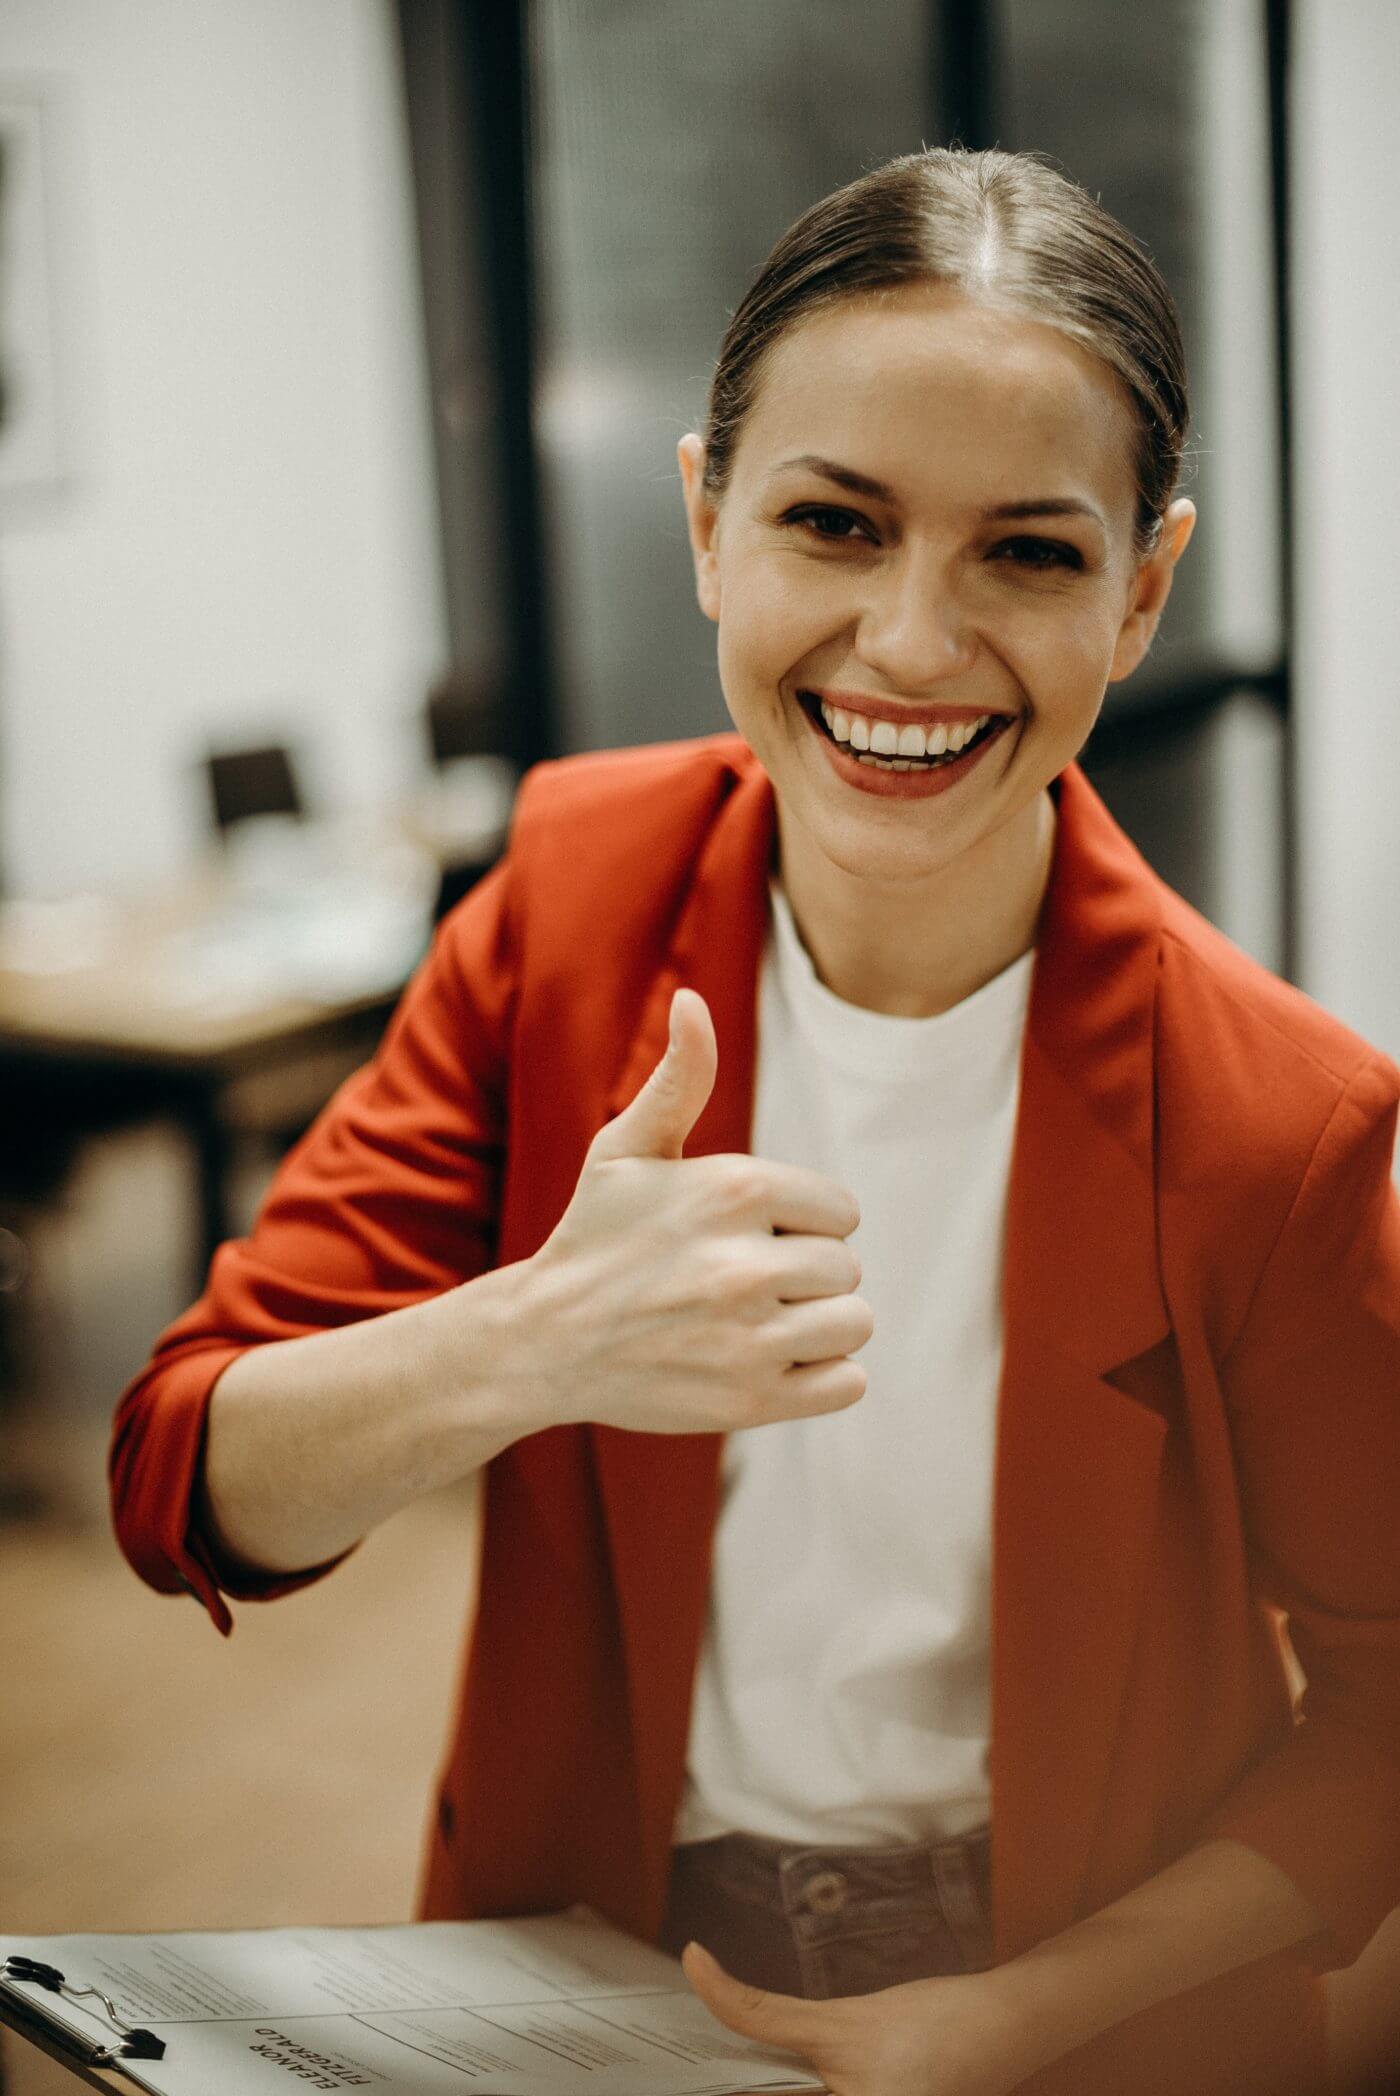 young businesswoman smiling and showing thumbs up